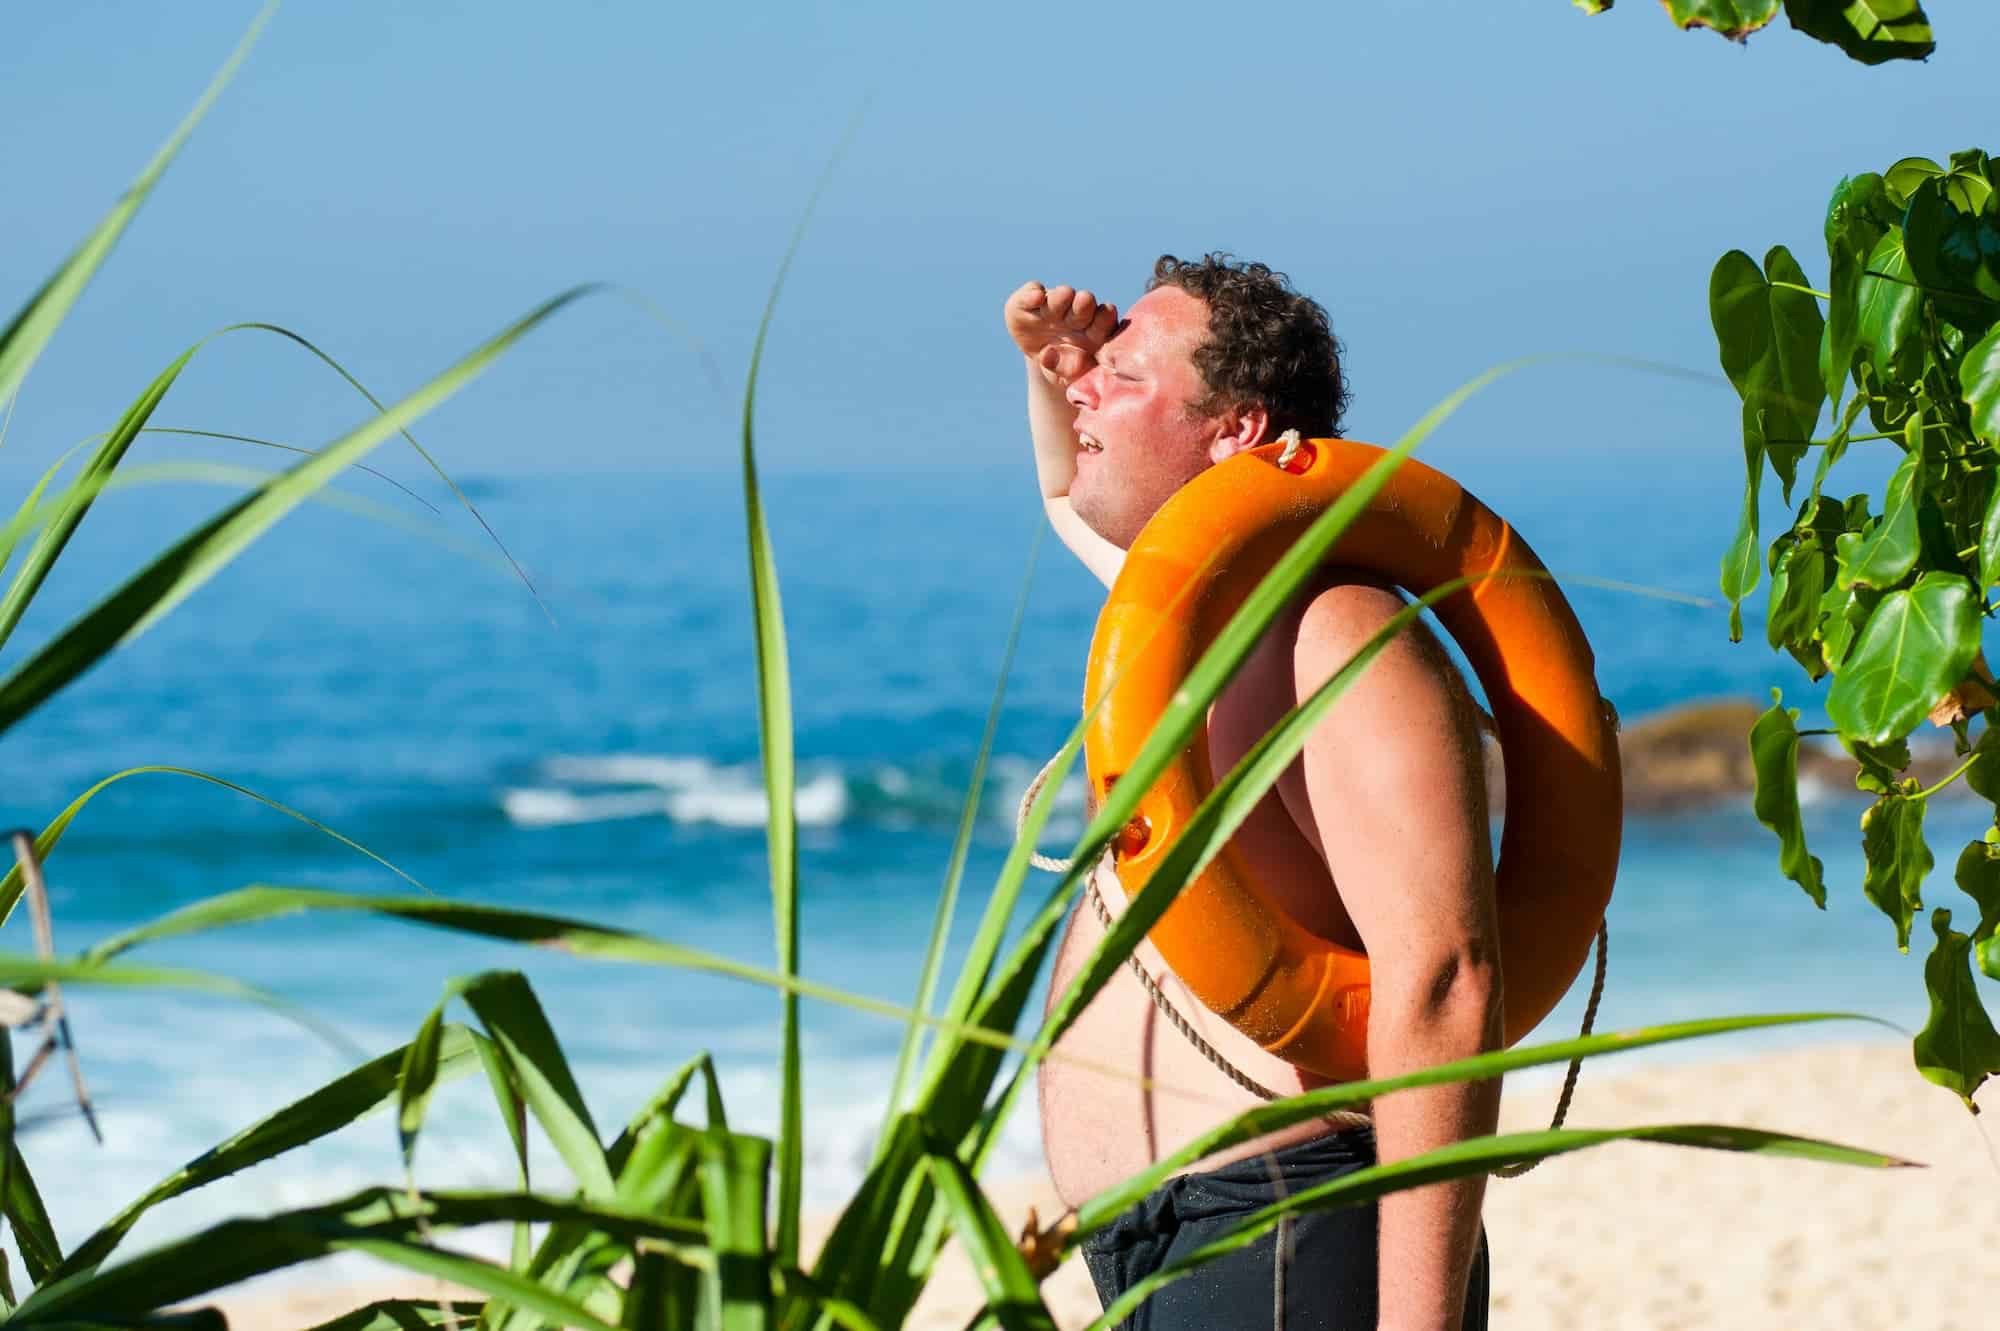 Small Business Website Design Services Get You Noticed - Stranded Guy On beach